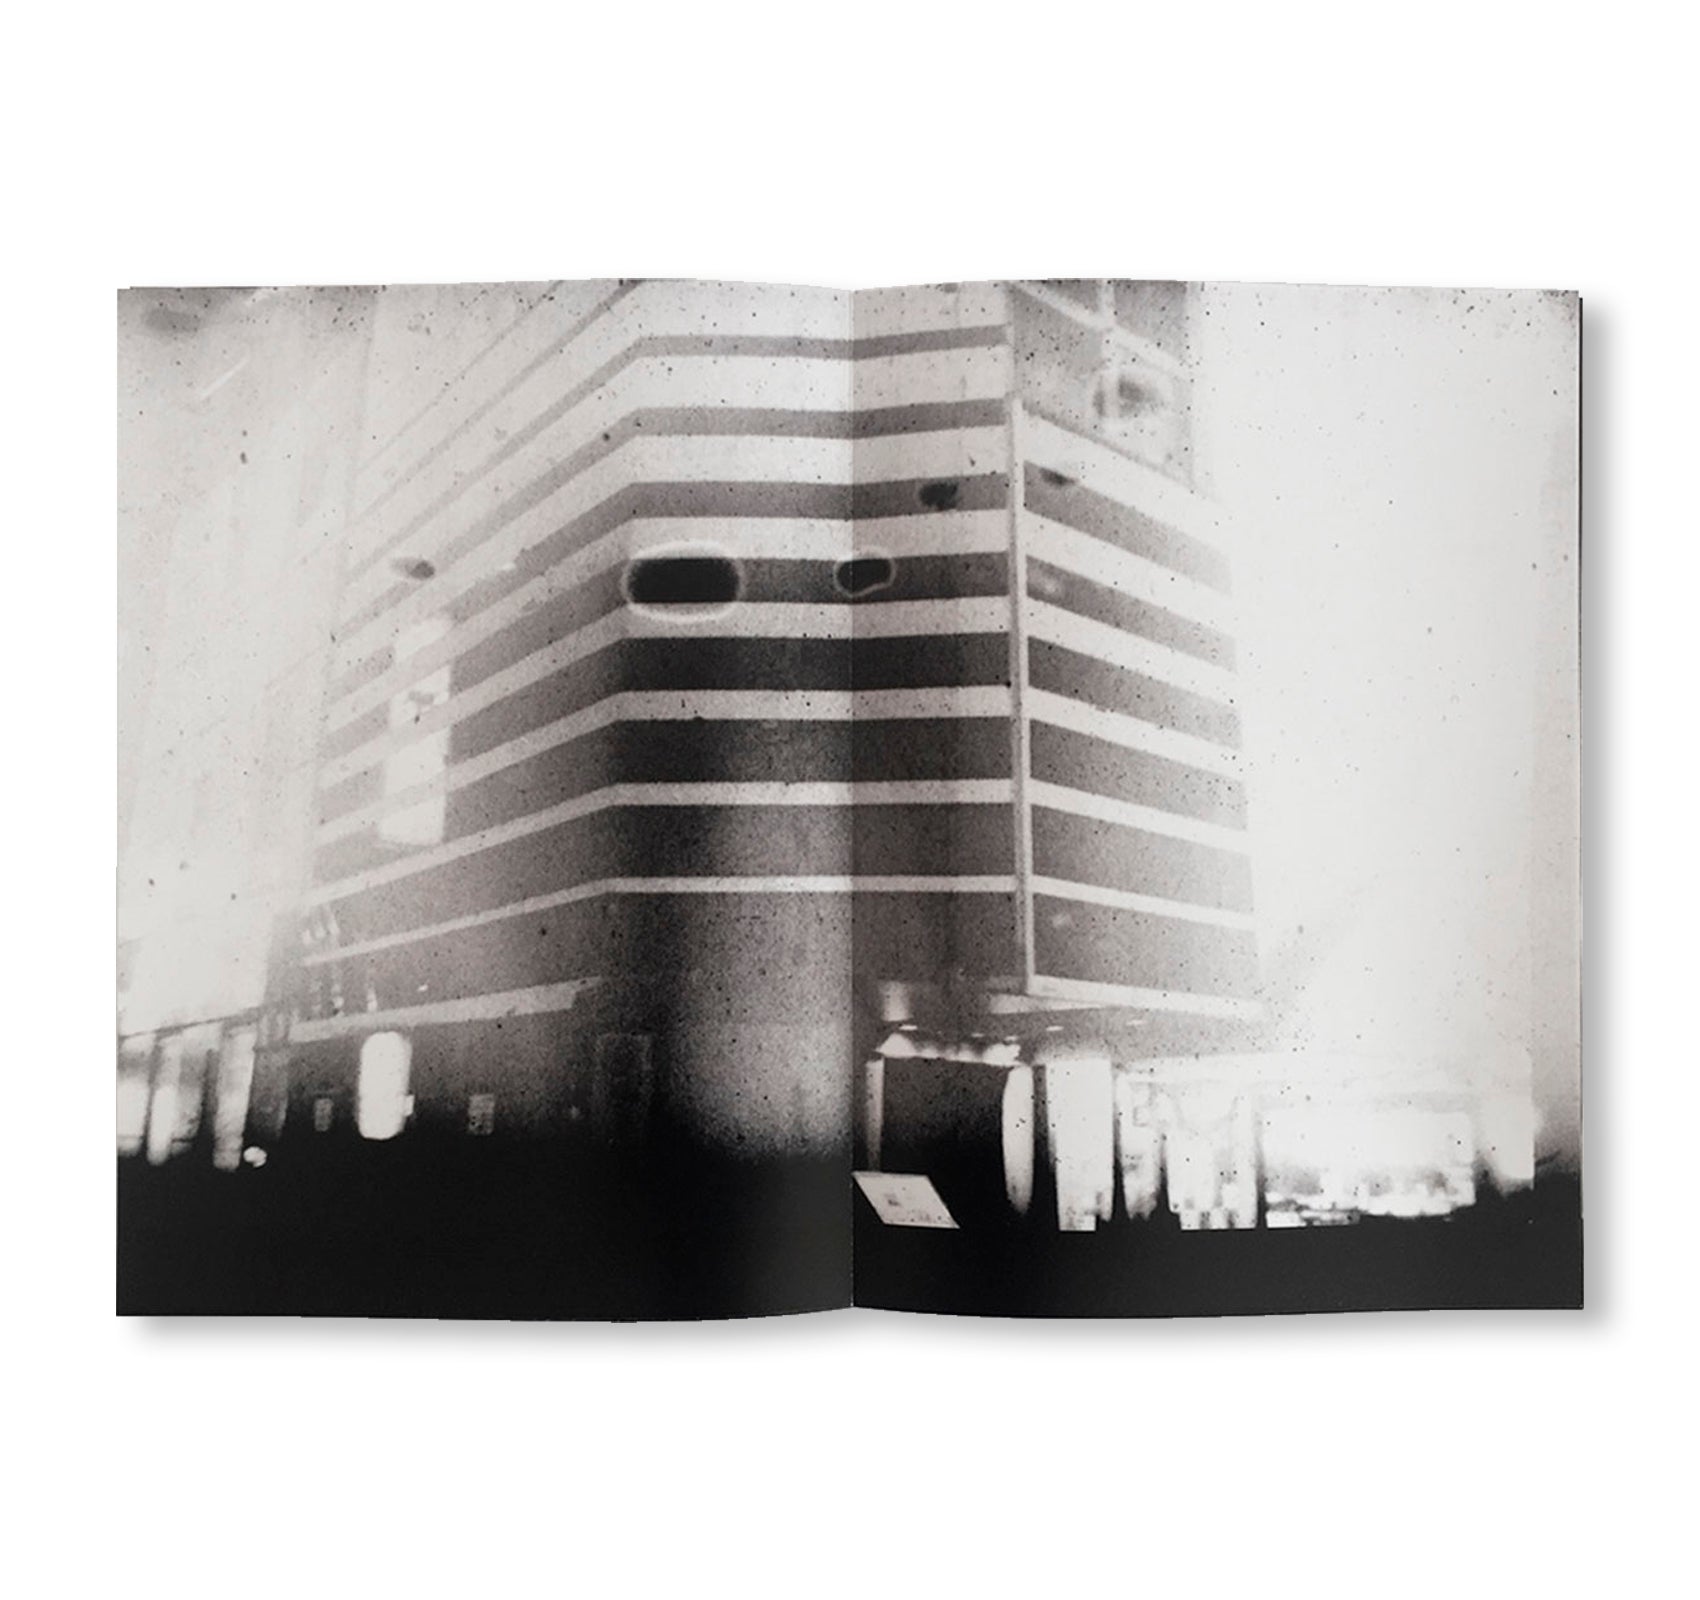 TYO2 by Antony Cairns [PAPER VERSION]